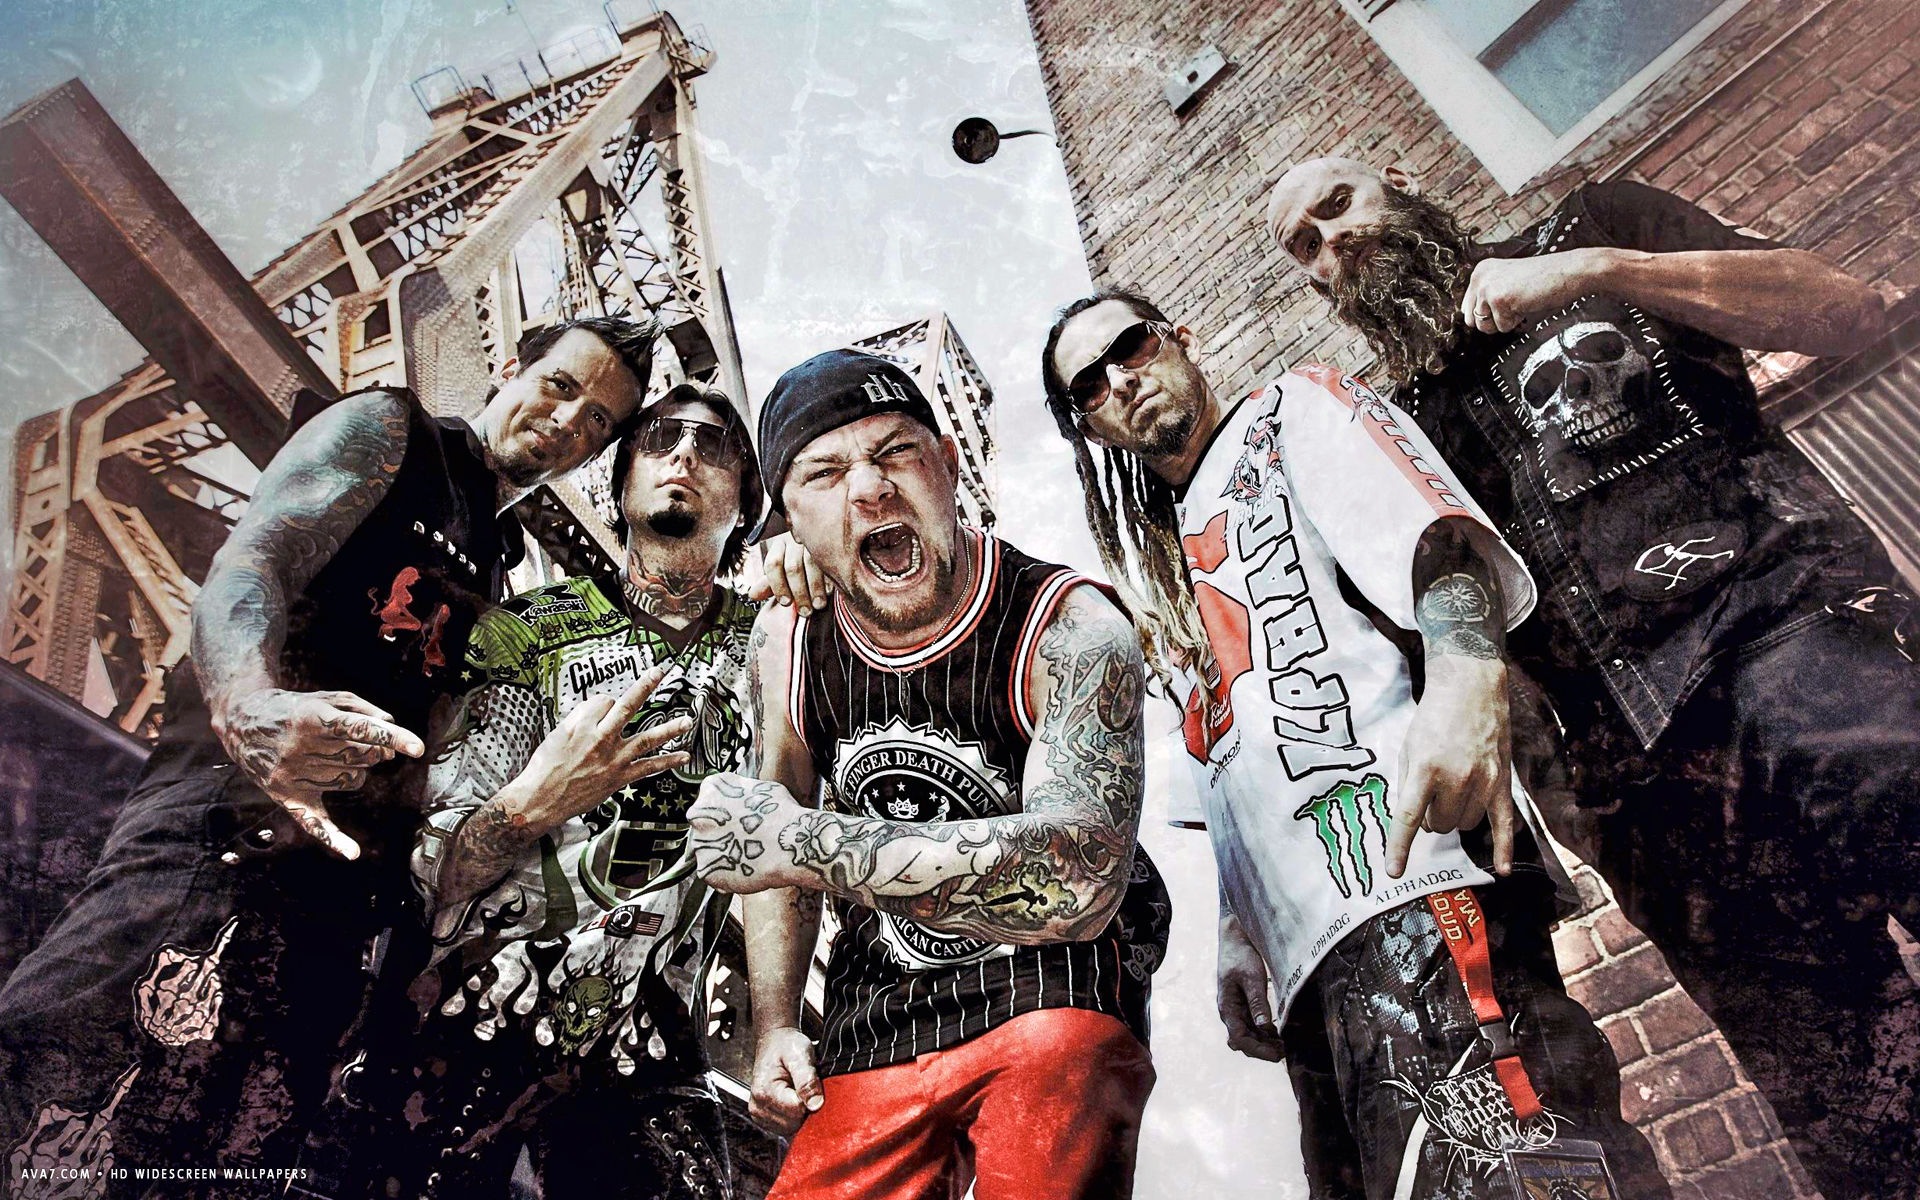 Five Finger Death Punch Music Band Group Hd Widescreen - Five Finger Death Punch Band - HD Wallpaper 